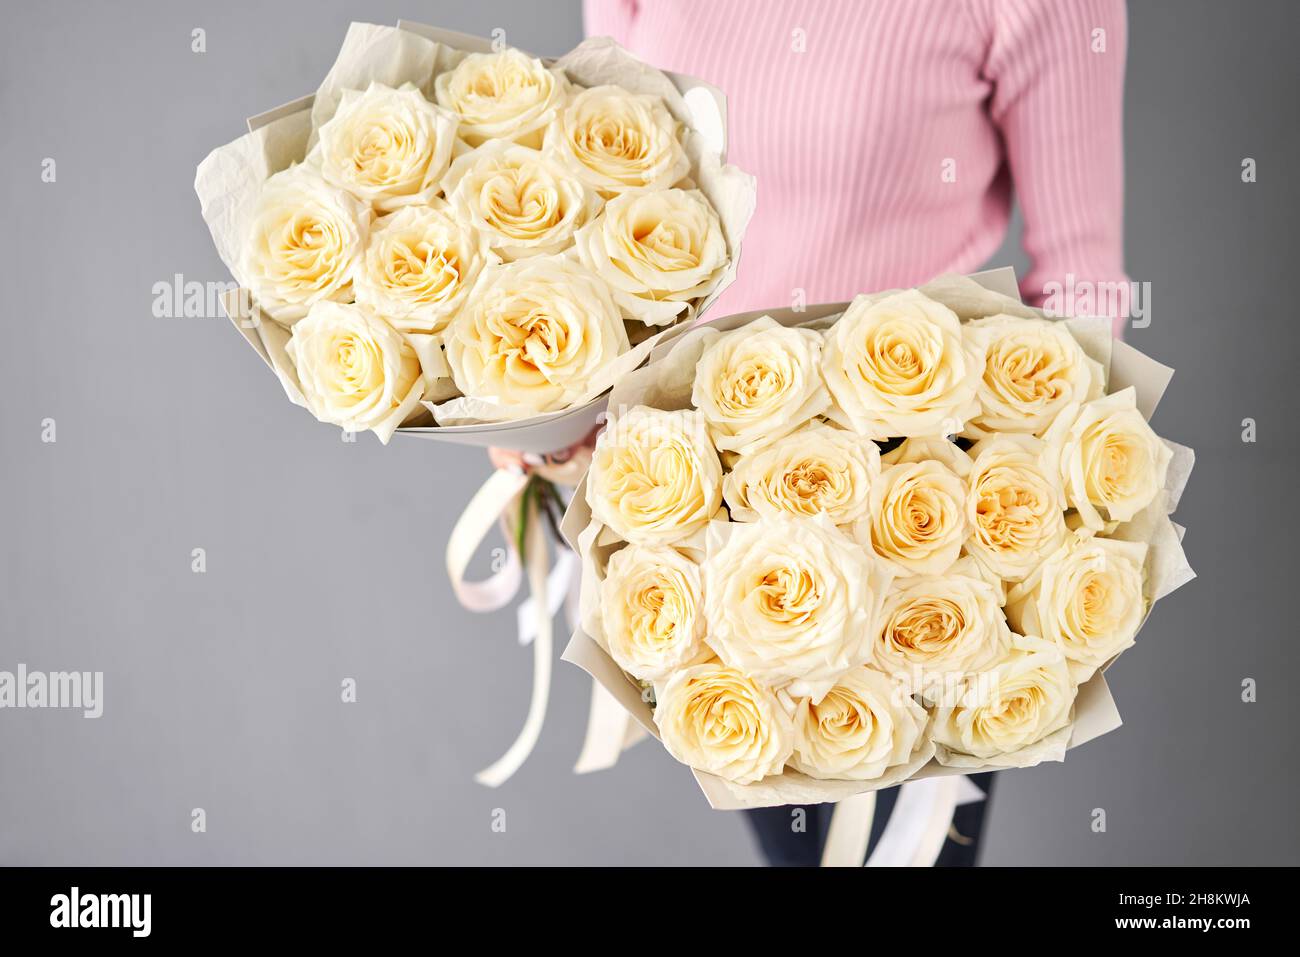 Two beautiful bouquets of peony-shaped white cream roses for mom and daughter Stock Photo